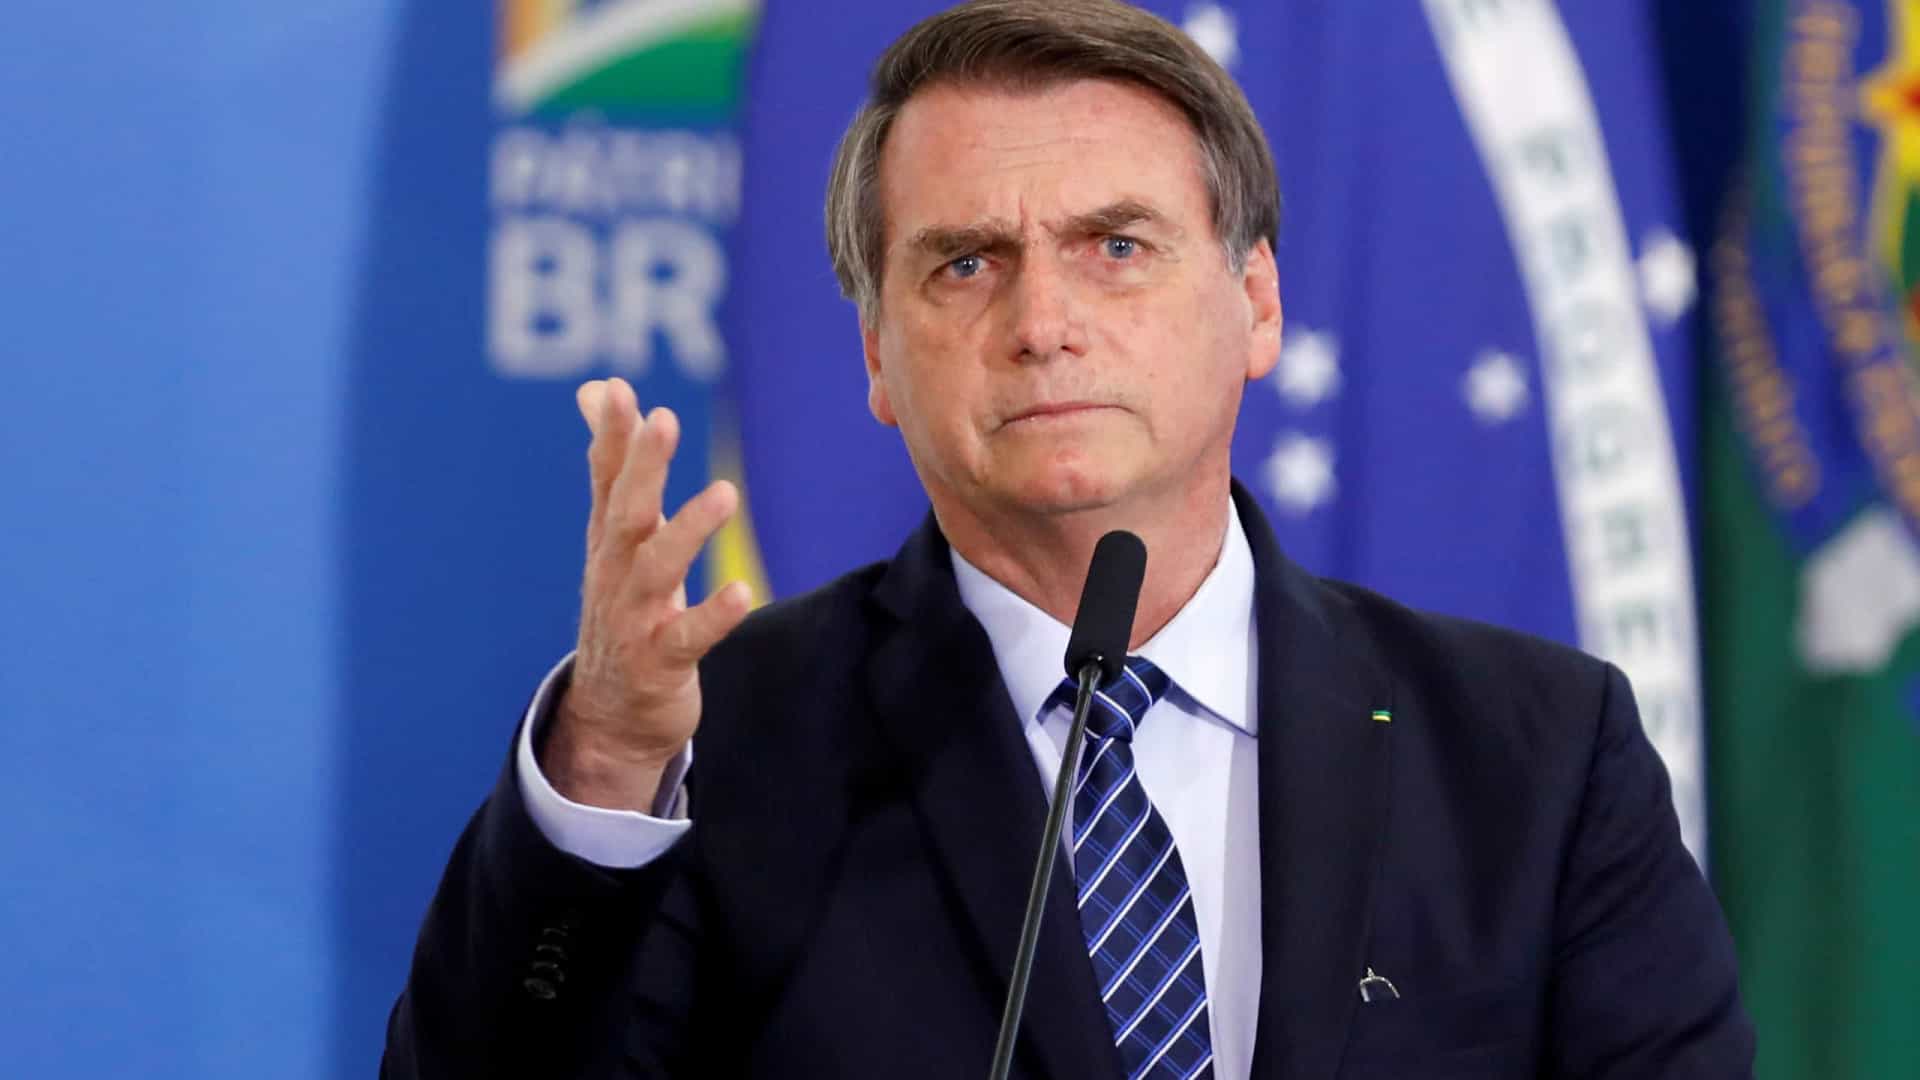 In an event at the Rio de Janeiro Federal Highway Police (PRF) headquarters, Bolsonaro also said that the use of chloroquine against the novel coronavirus "has been working well," although the drug has no proven efficacy against the disease.